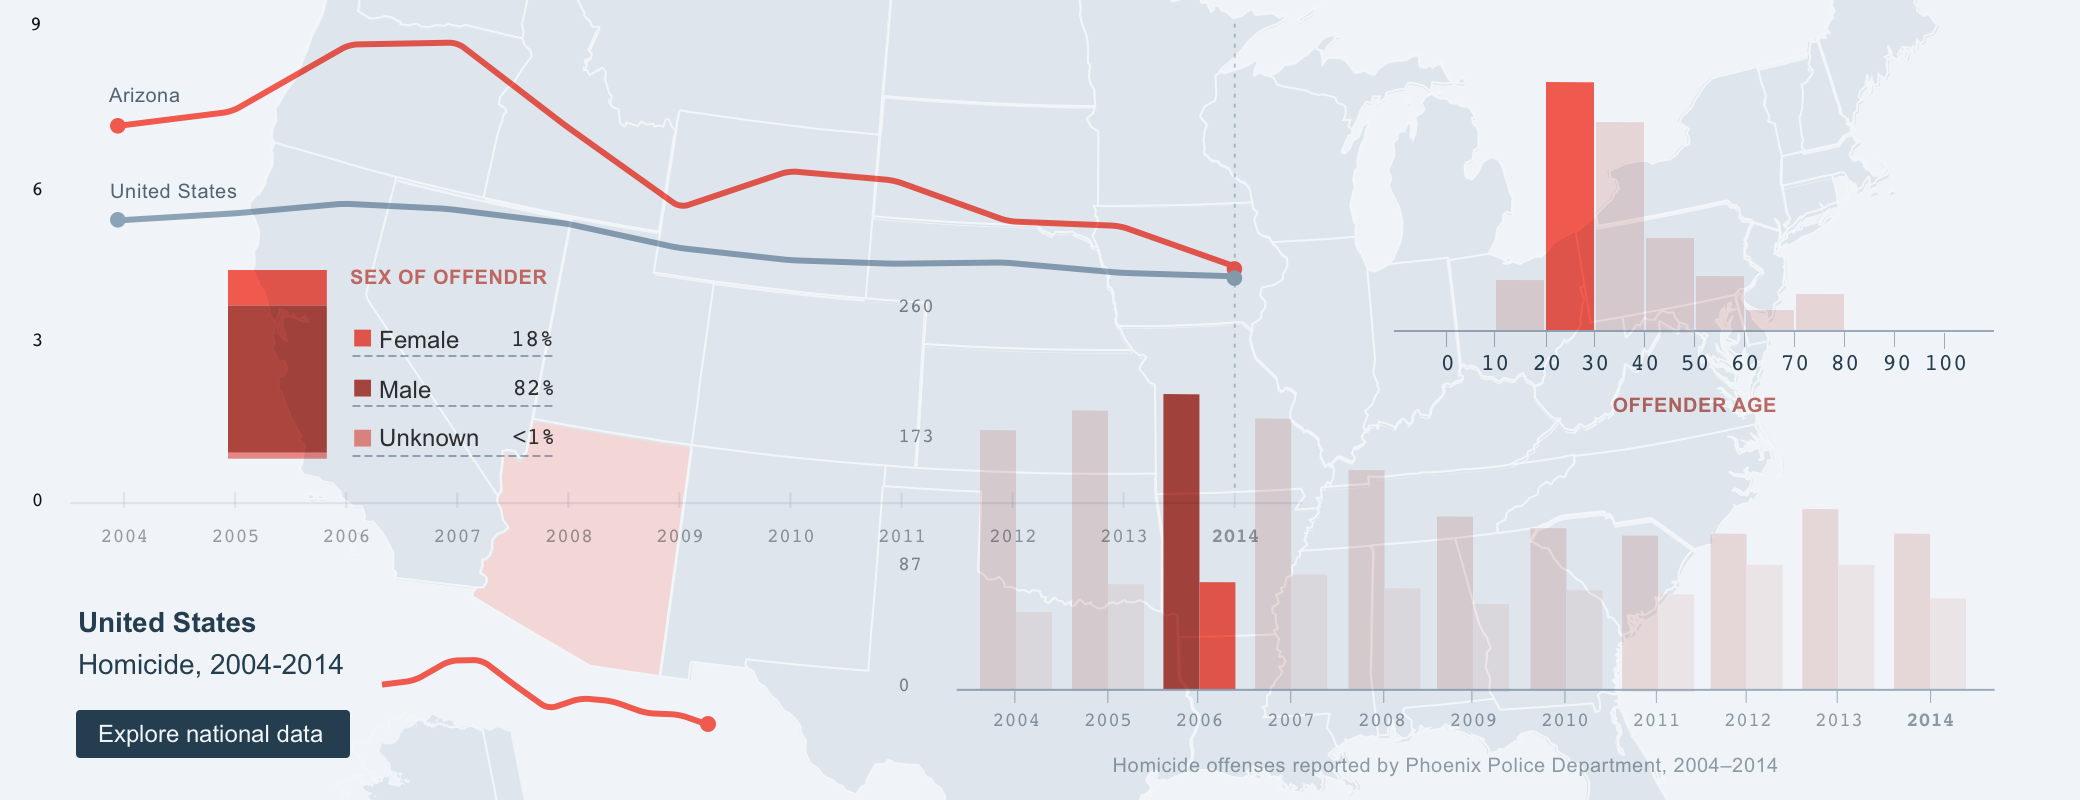 Crime data graphs laid over a map of the U.S.